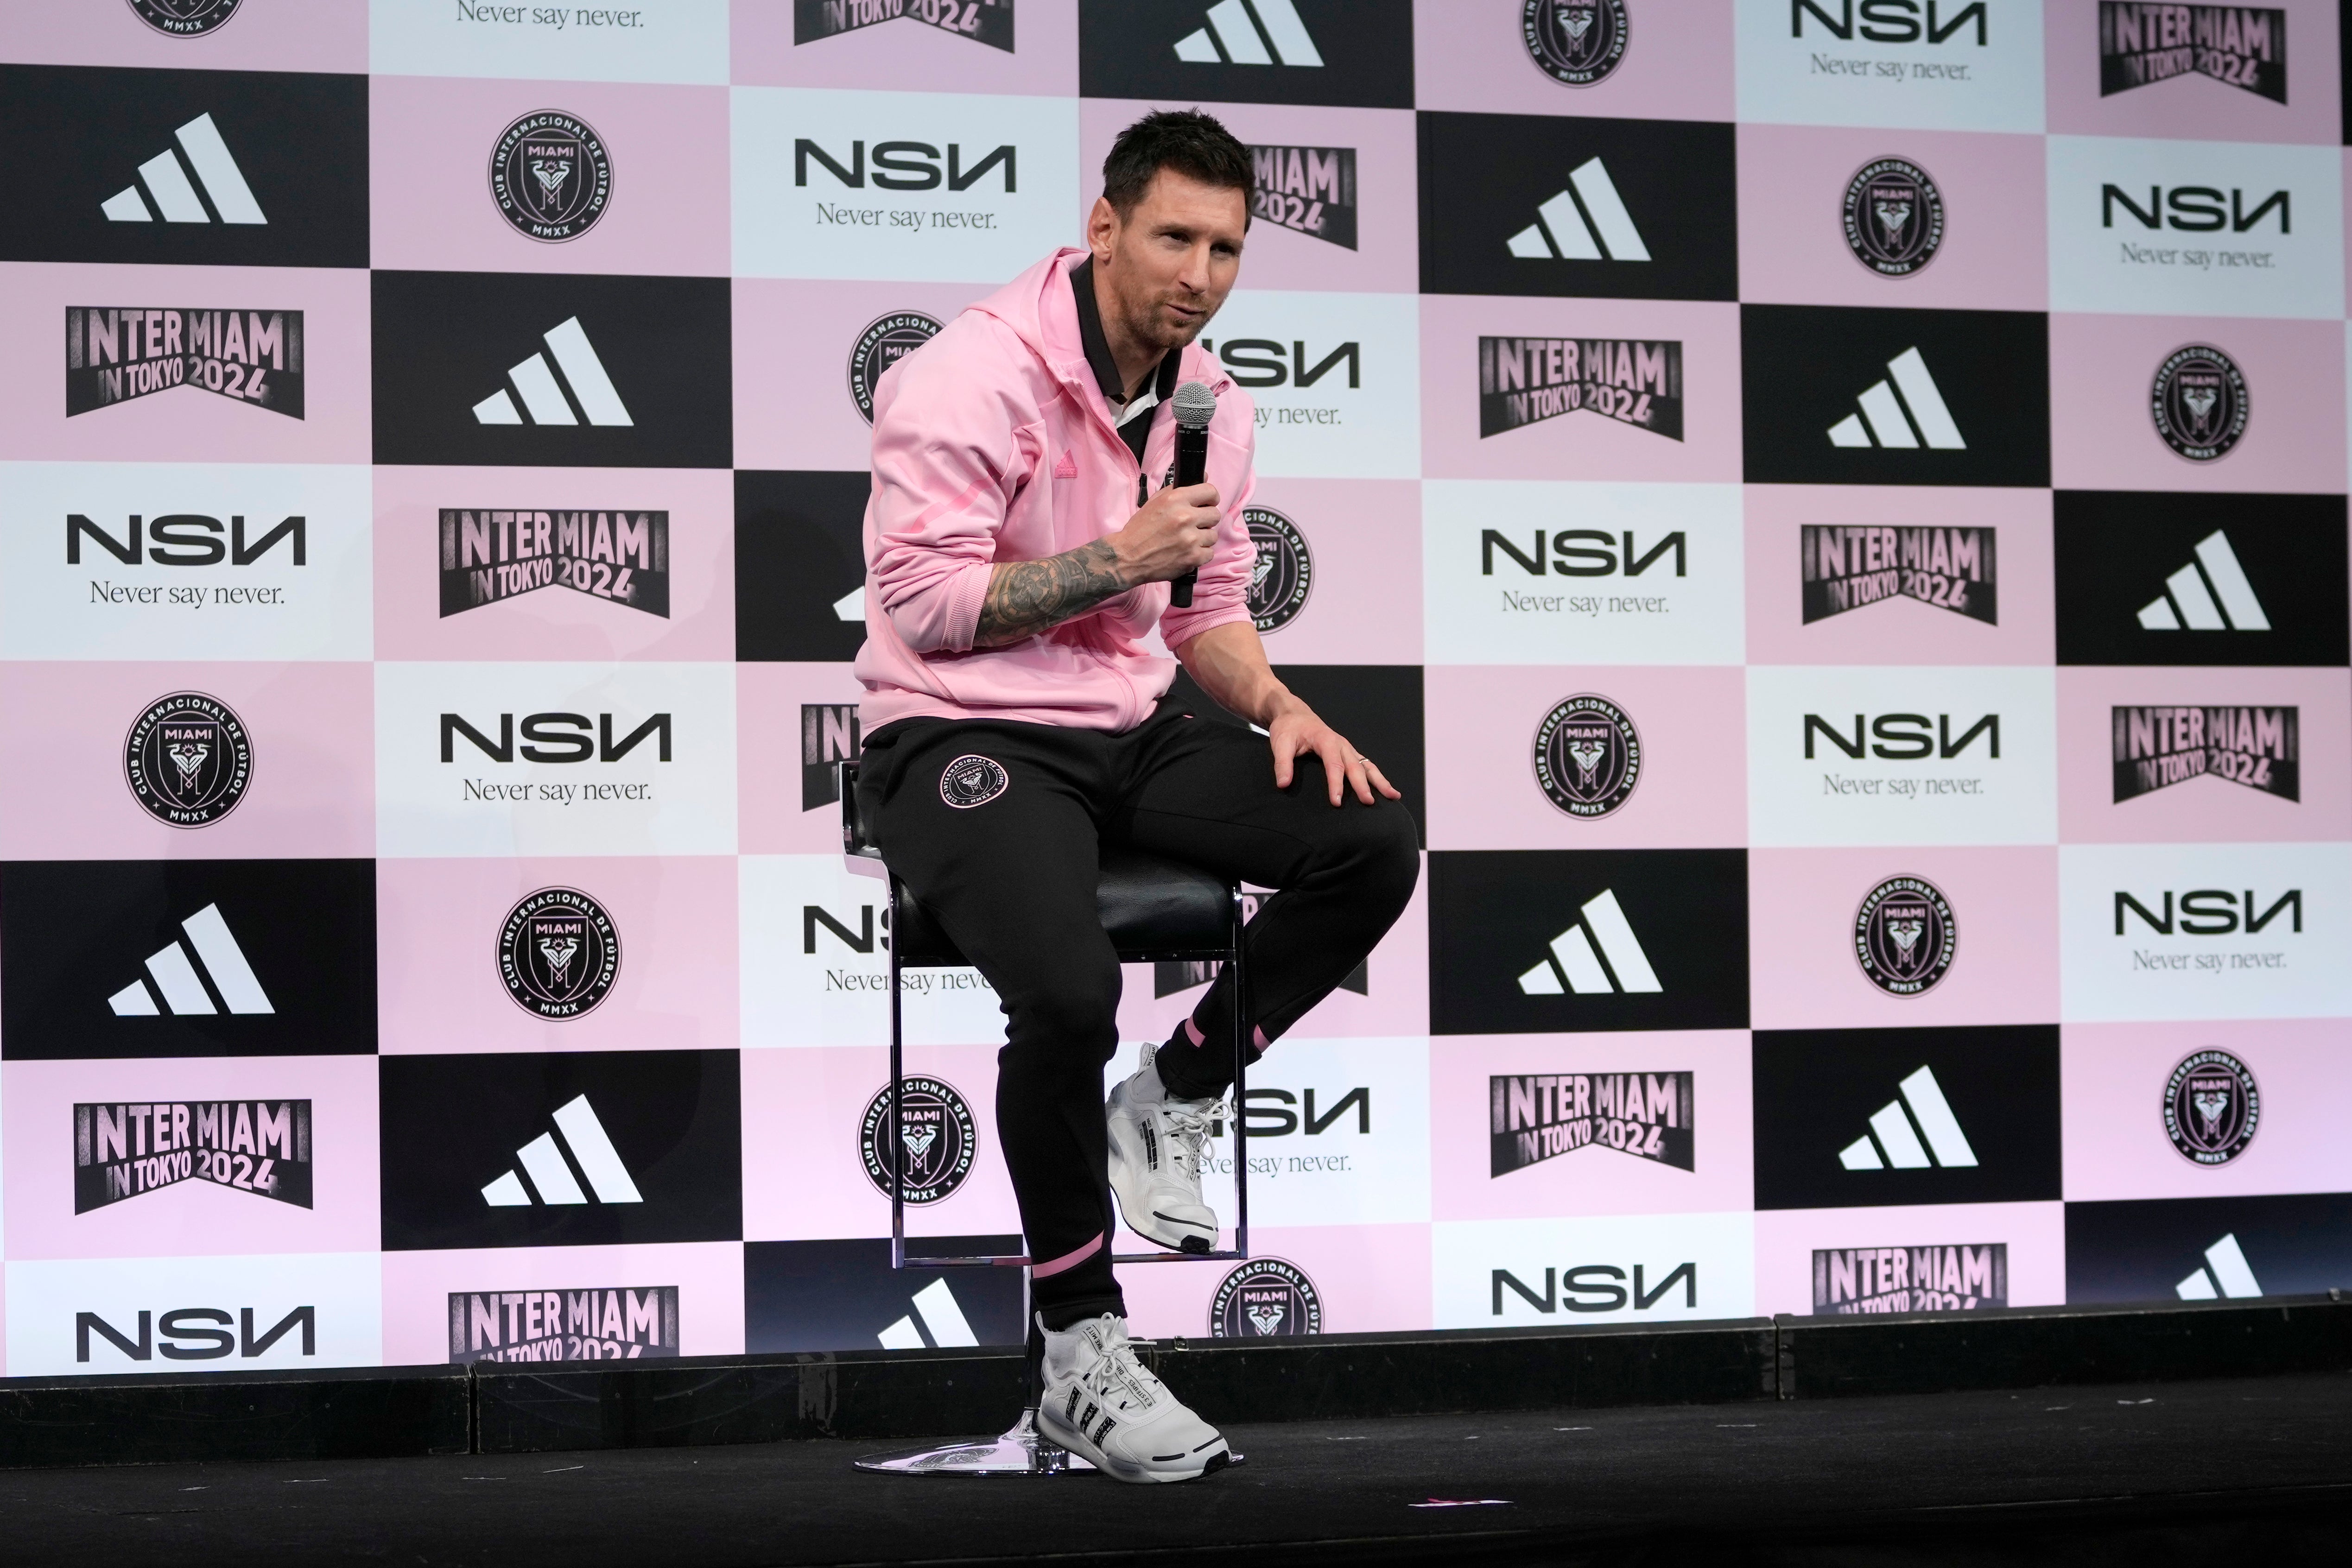 File: Inter Miami's Lionel Messi speaks during a press conference at a hotel, ahead of his team's friendly soccer match